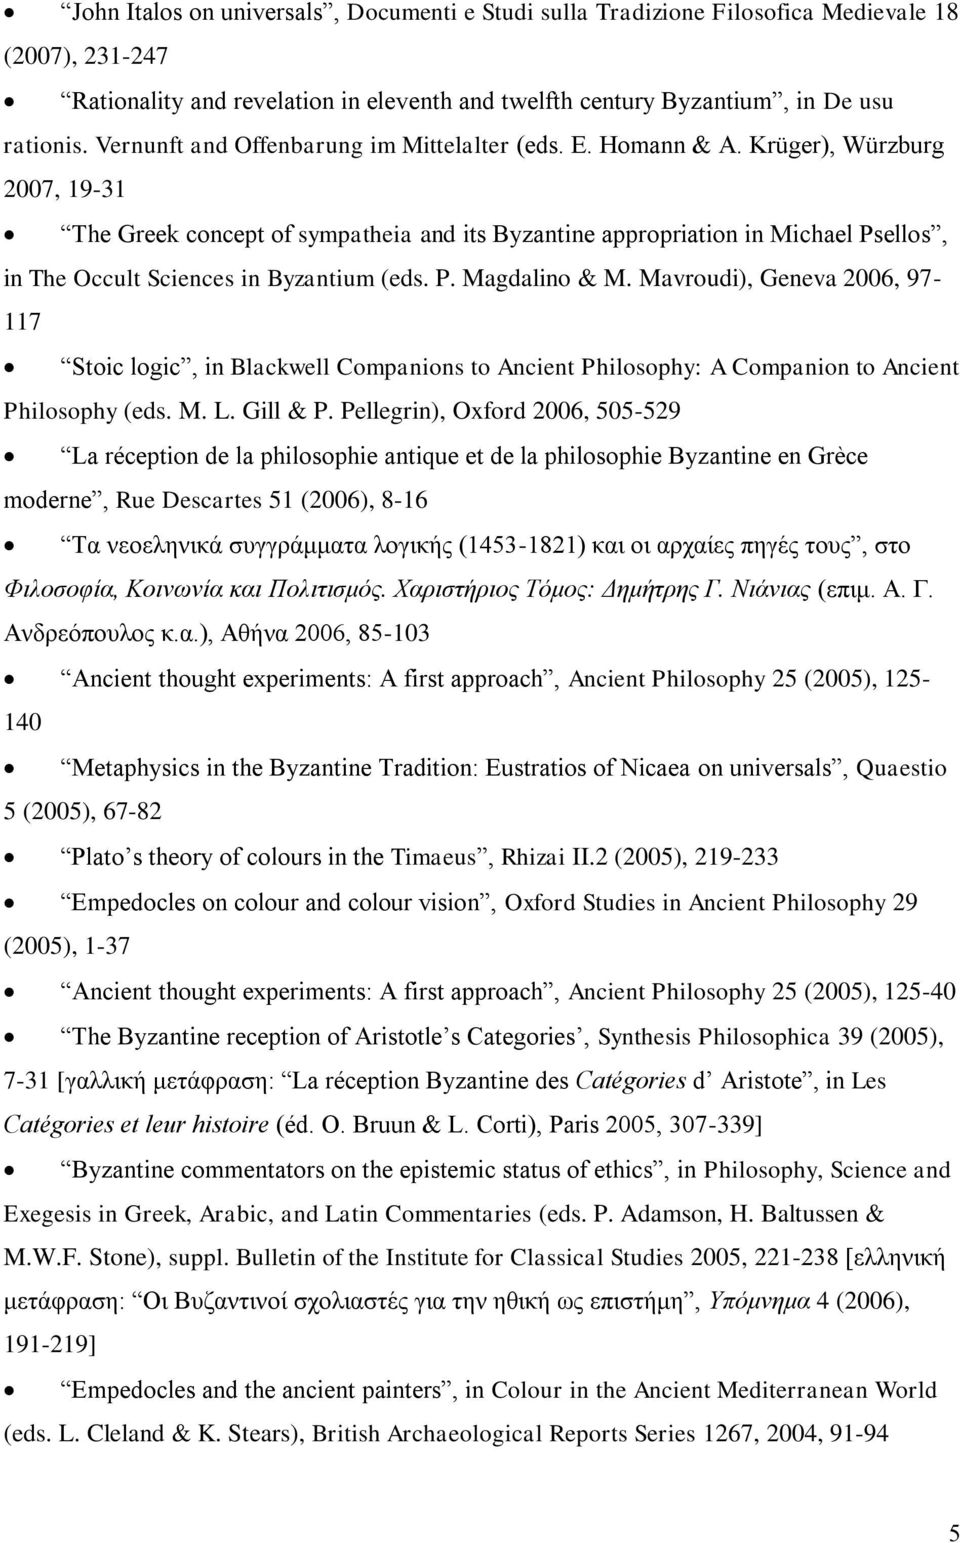 Krüger), Würzburg 2007, 19-31 The Greek concept of sympatheia and its Byzantine appropriation in Michael Psellos, in The Occult Sciences in Byzantium (eds. P. Magdalino & M.